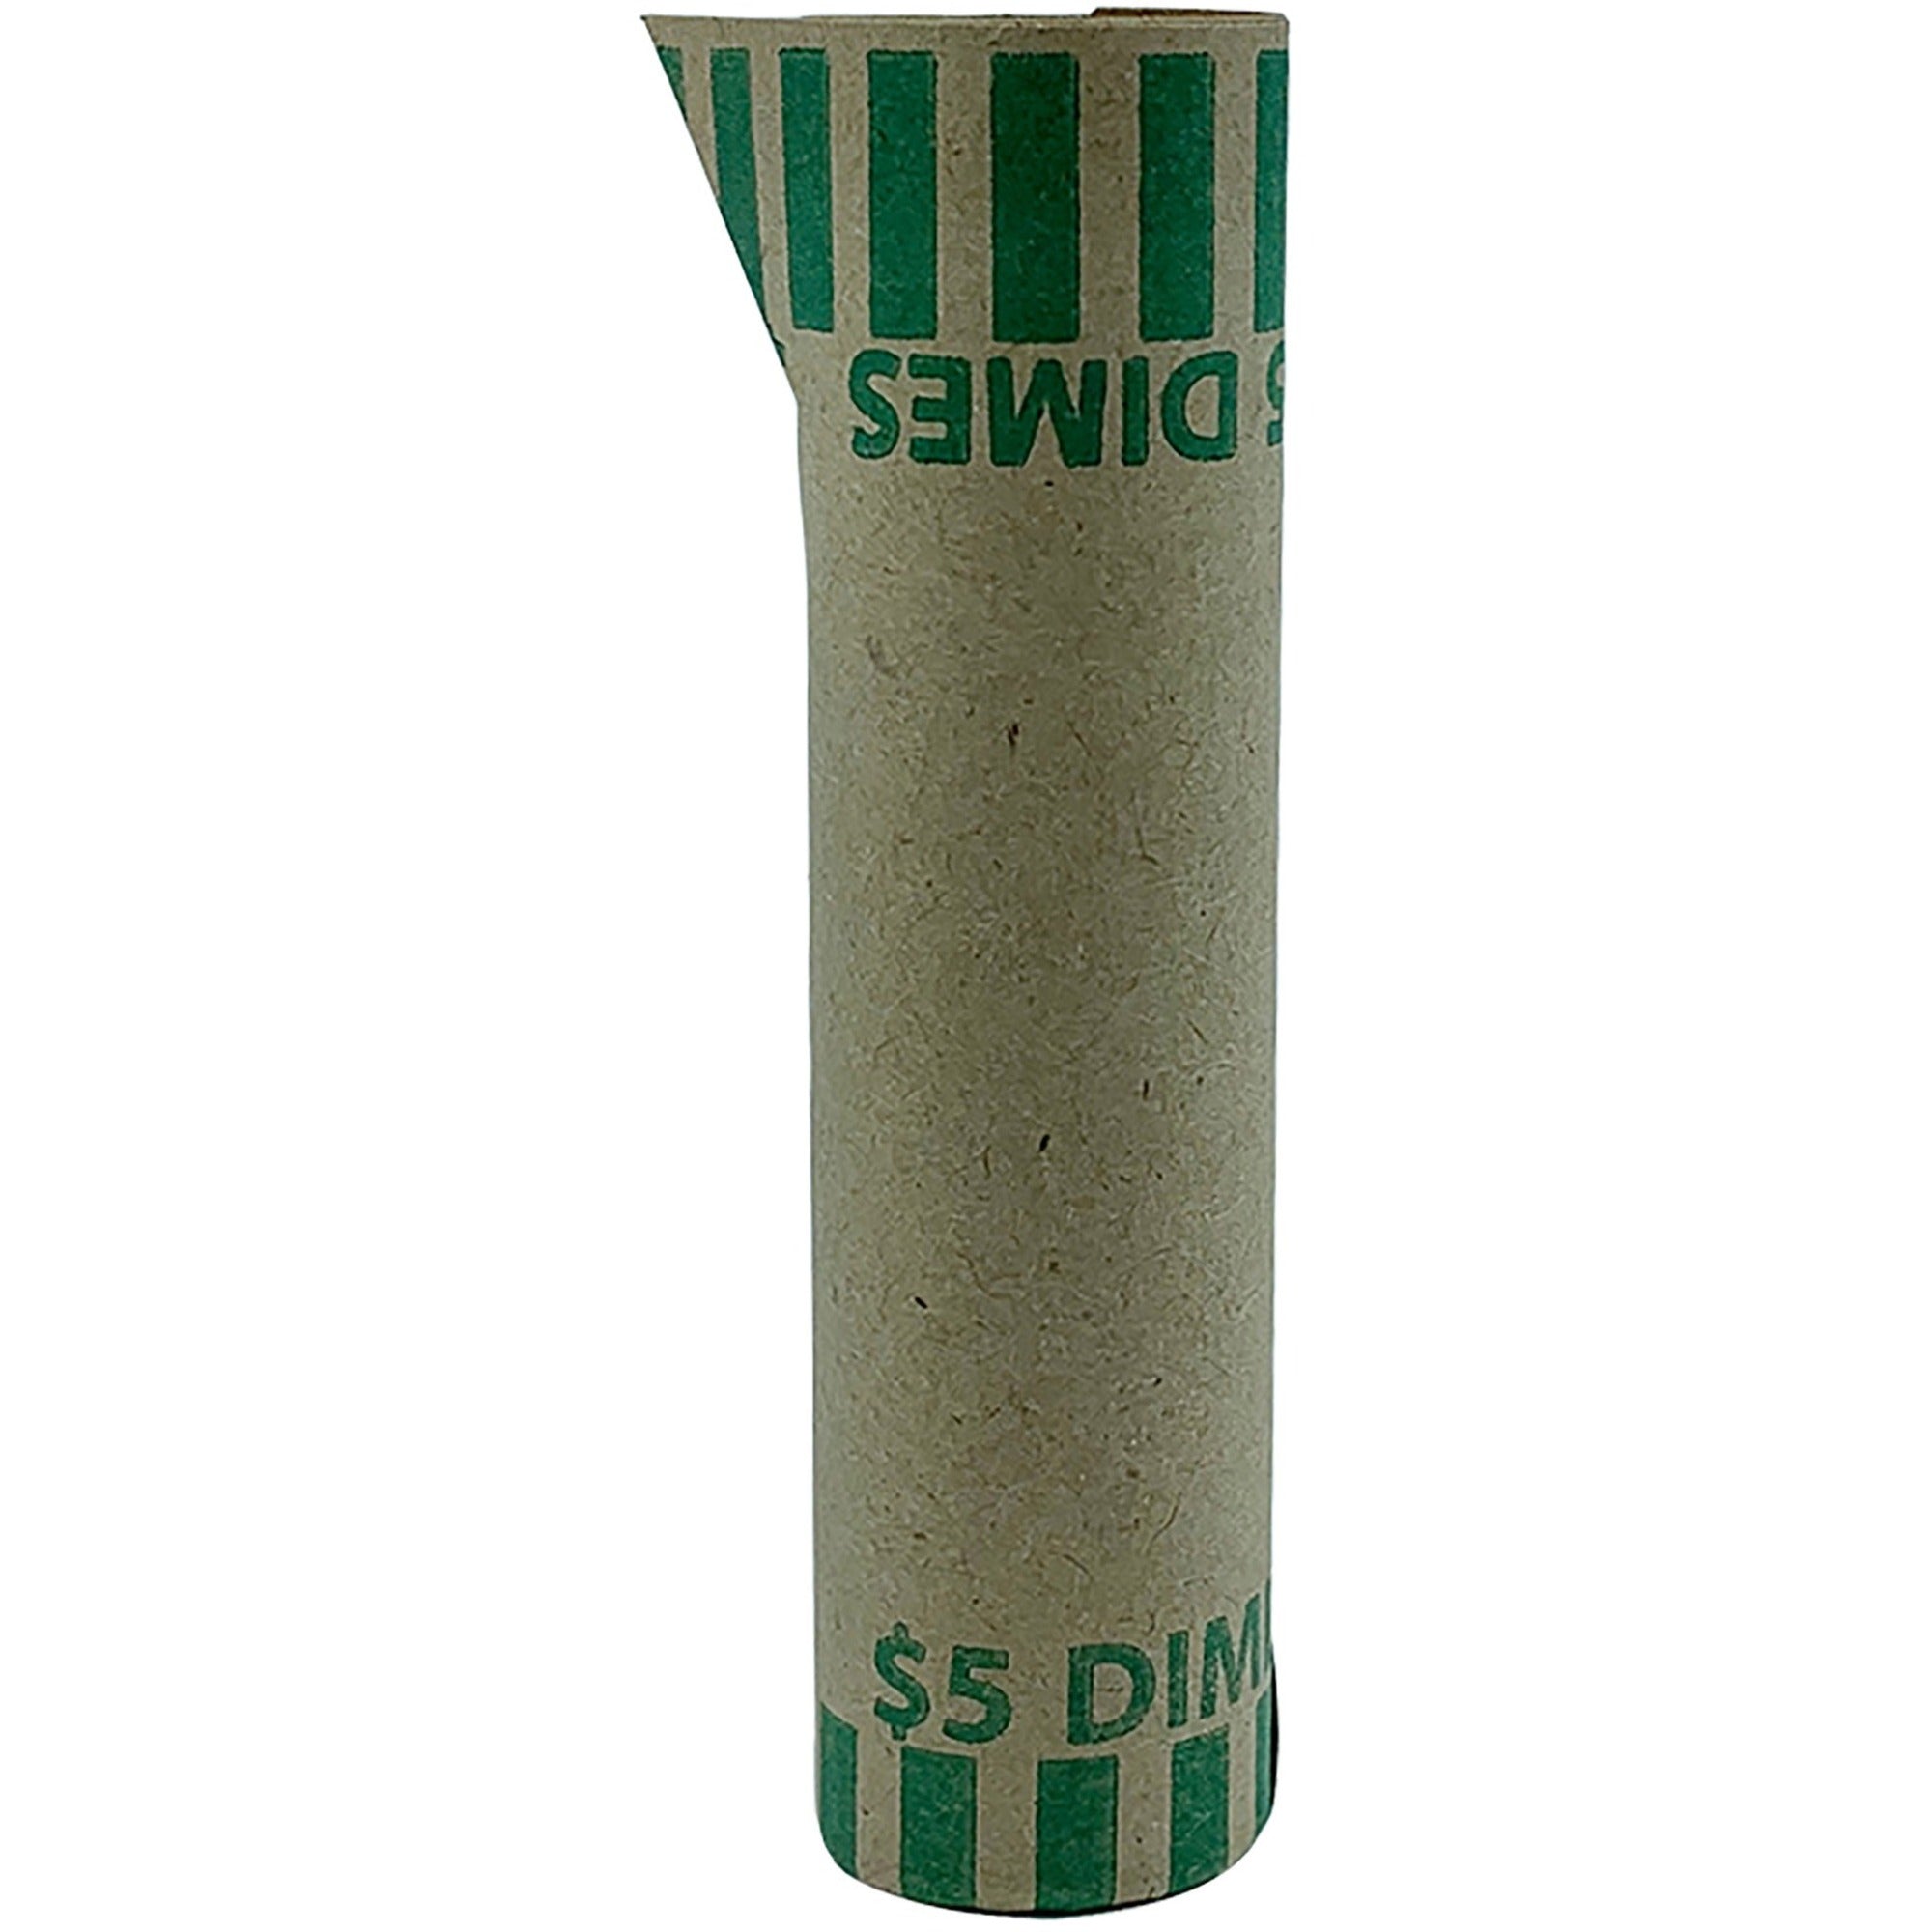 pap-r-tubular-coin-wrap-10-denomination-durable-burst-resistant-crimped-pre-formed-57-lb-basis-weight-paper-green-1000-box_pqp23010 - 1